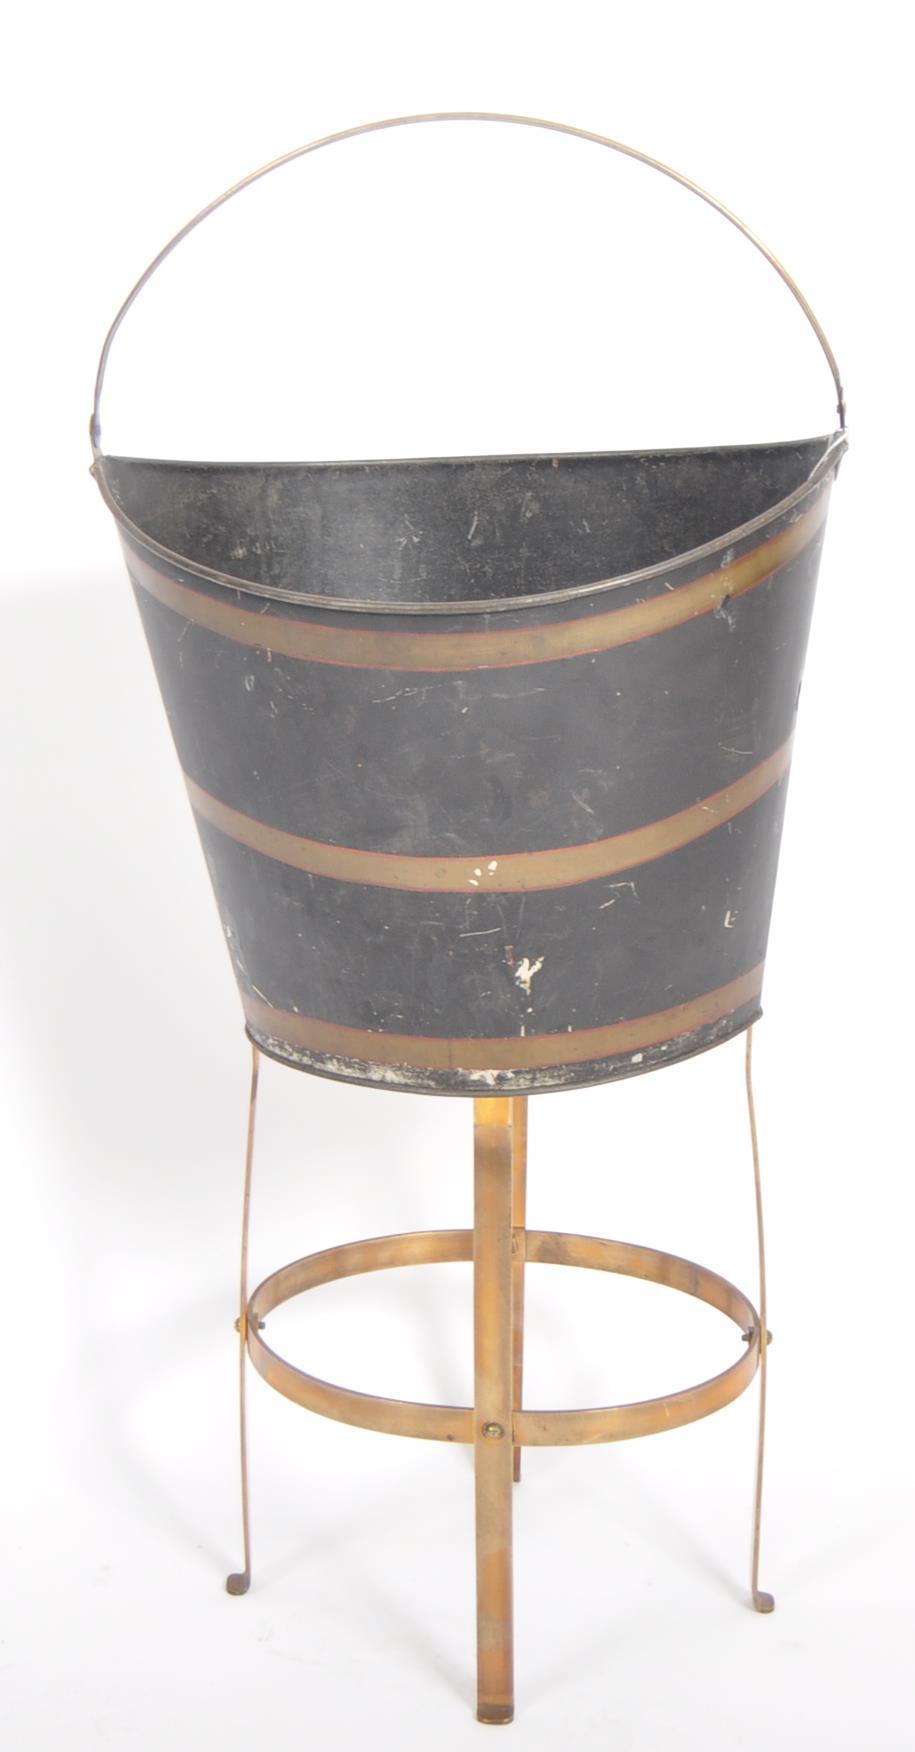 19TH CENTURY METAL PEAT BUCKET ON STAND - Image 6 of 7